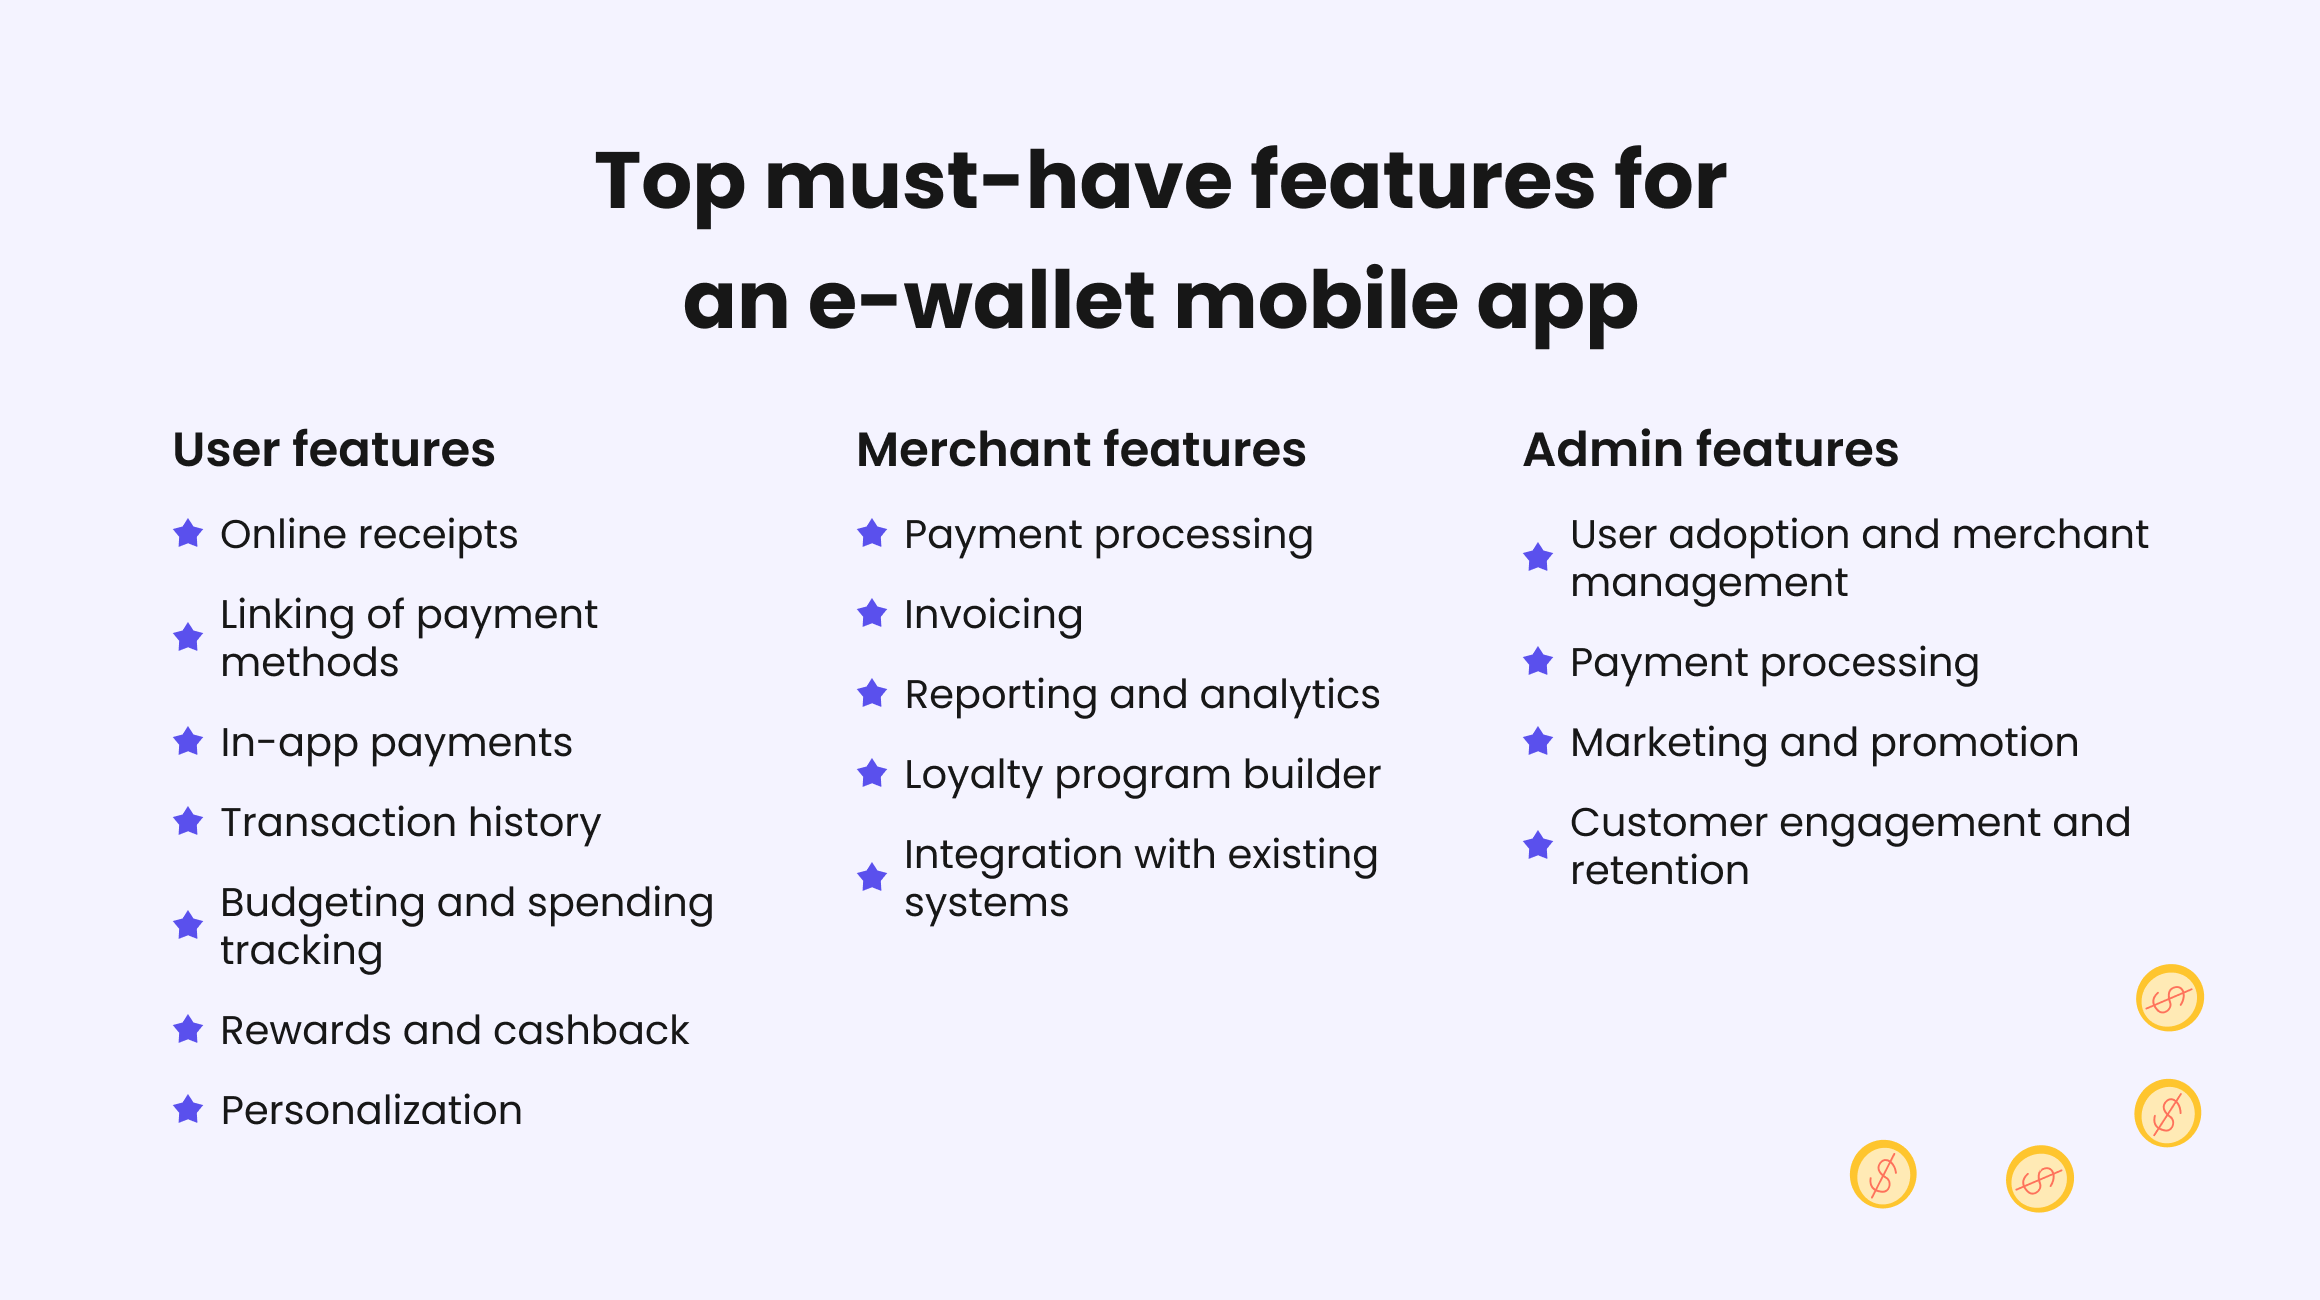 Top must-have features for an e-wallet mobile app